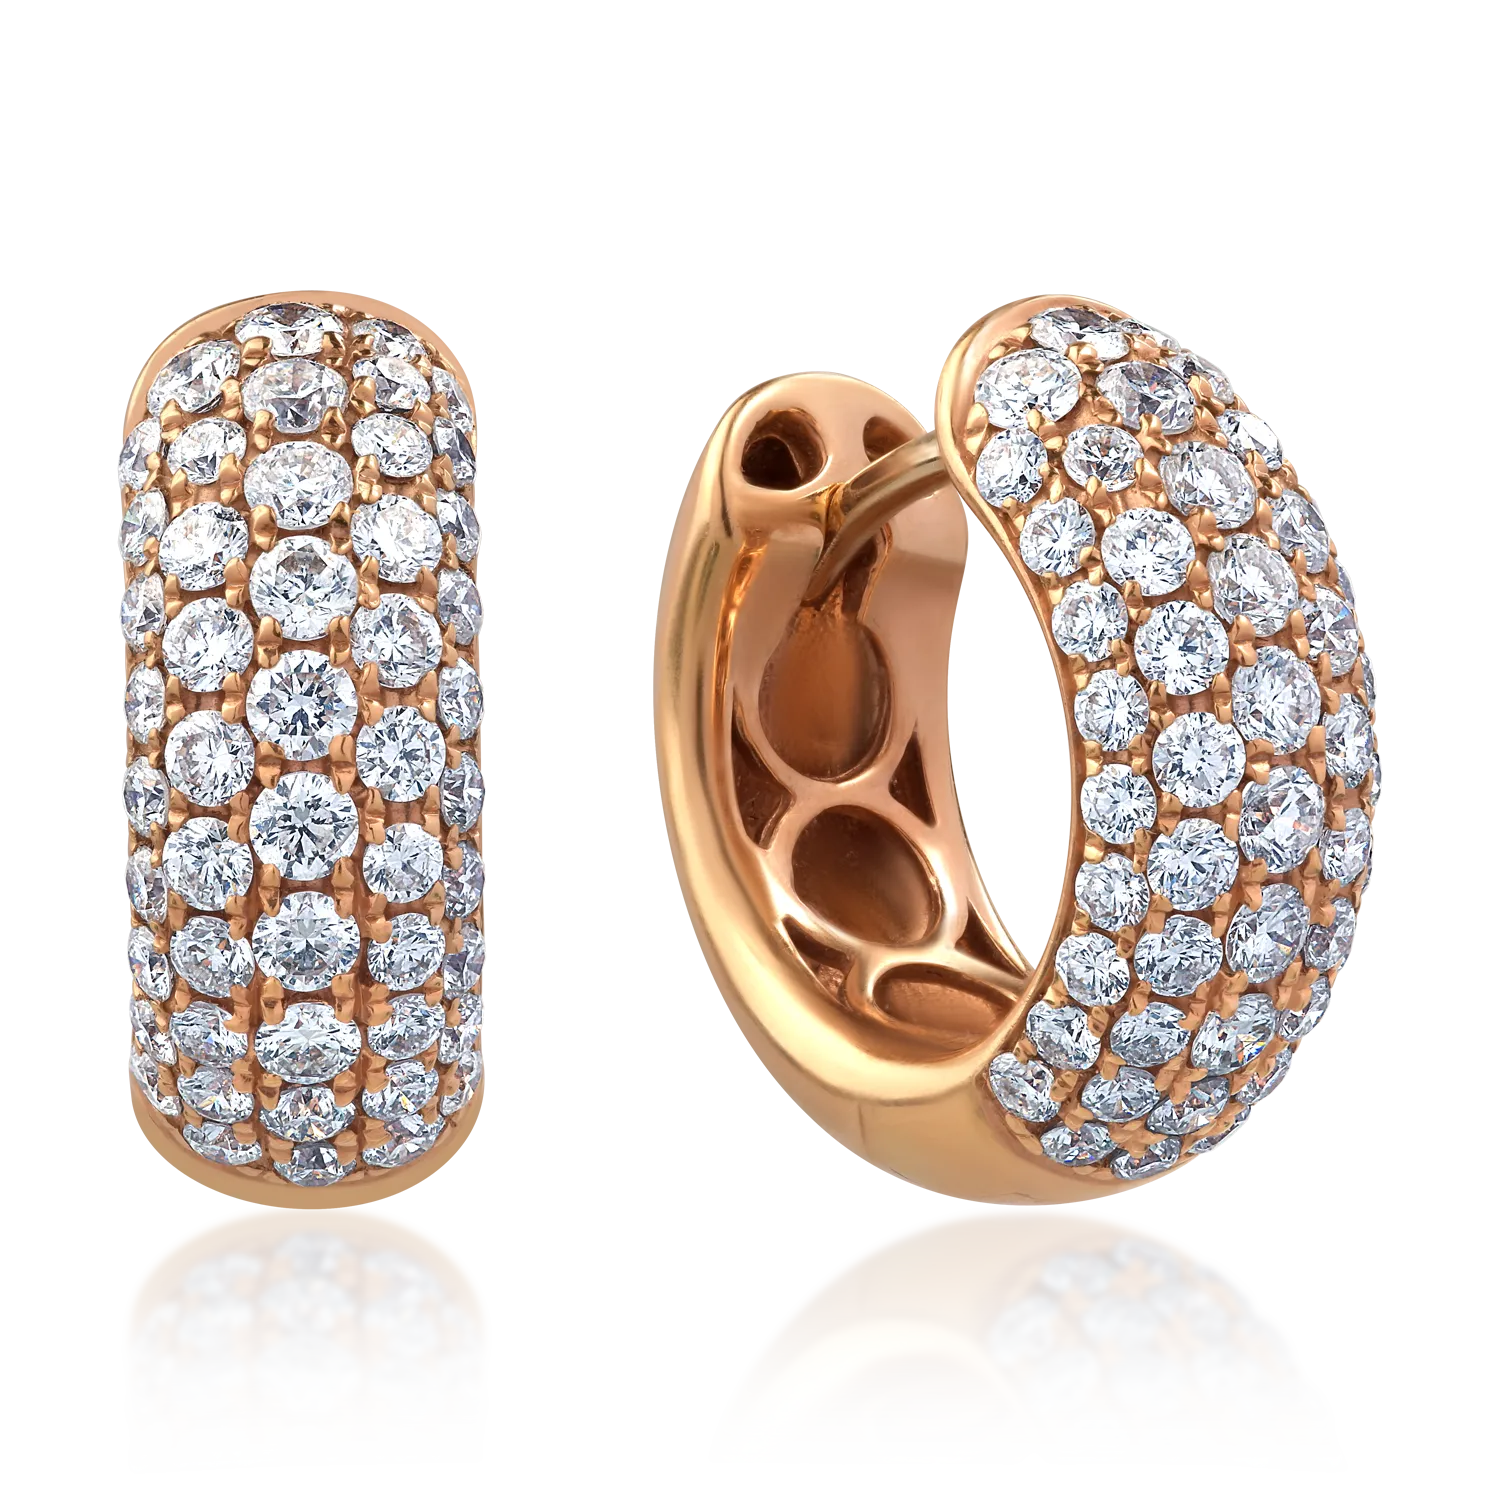 18K rose gold earrings with 1.12ct diamonds